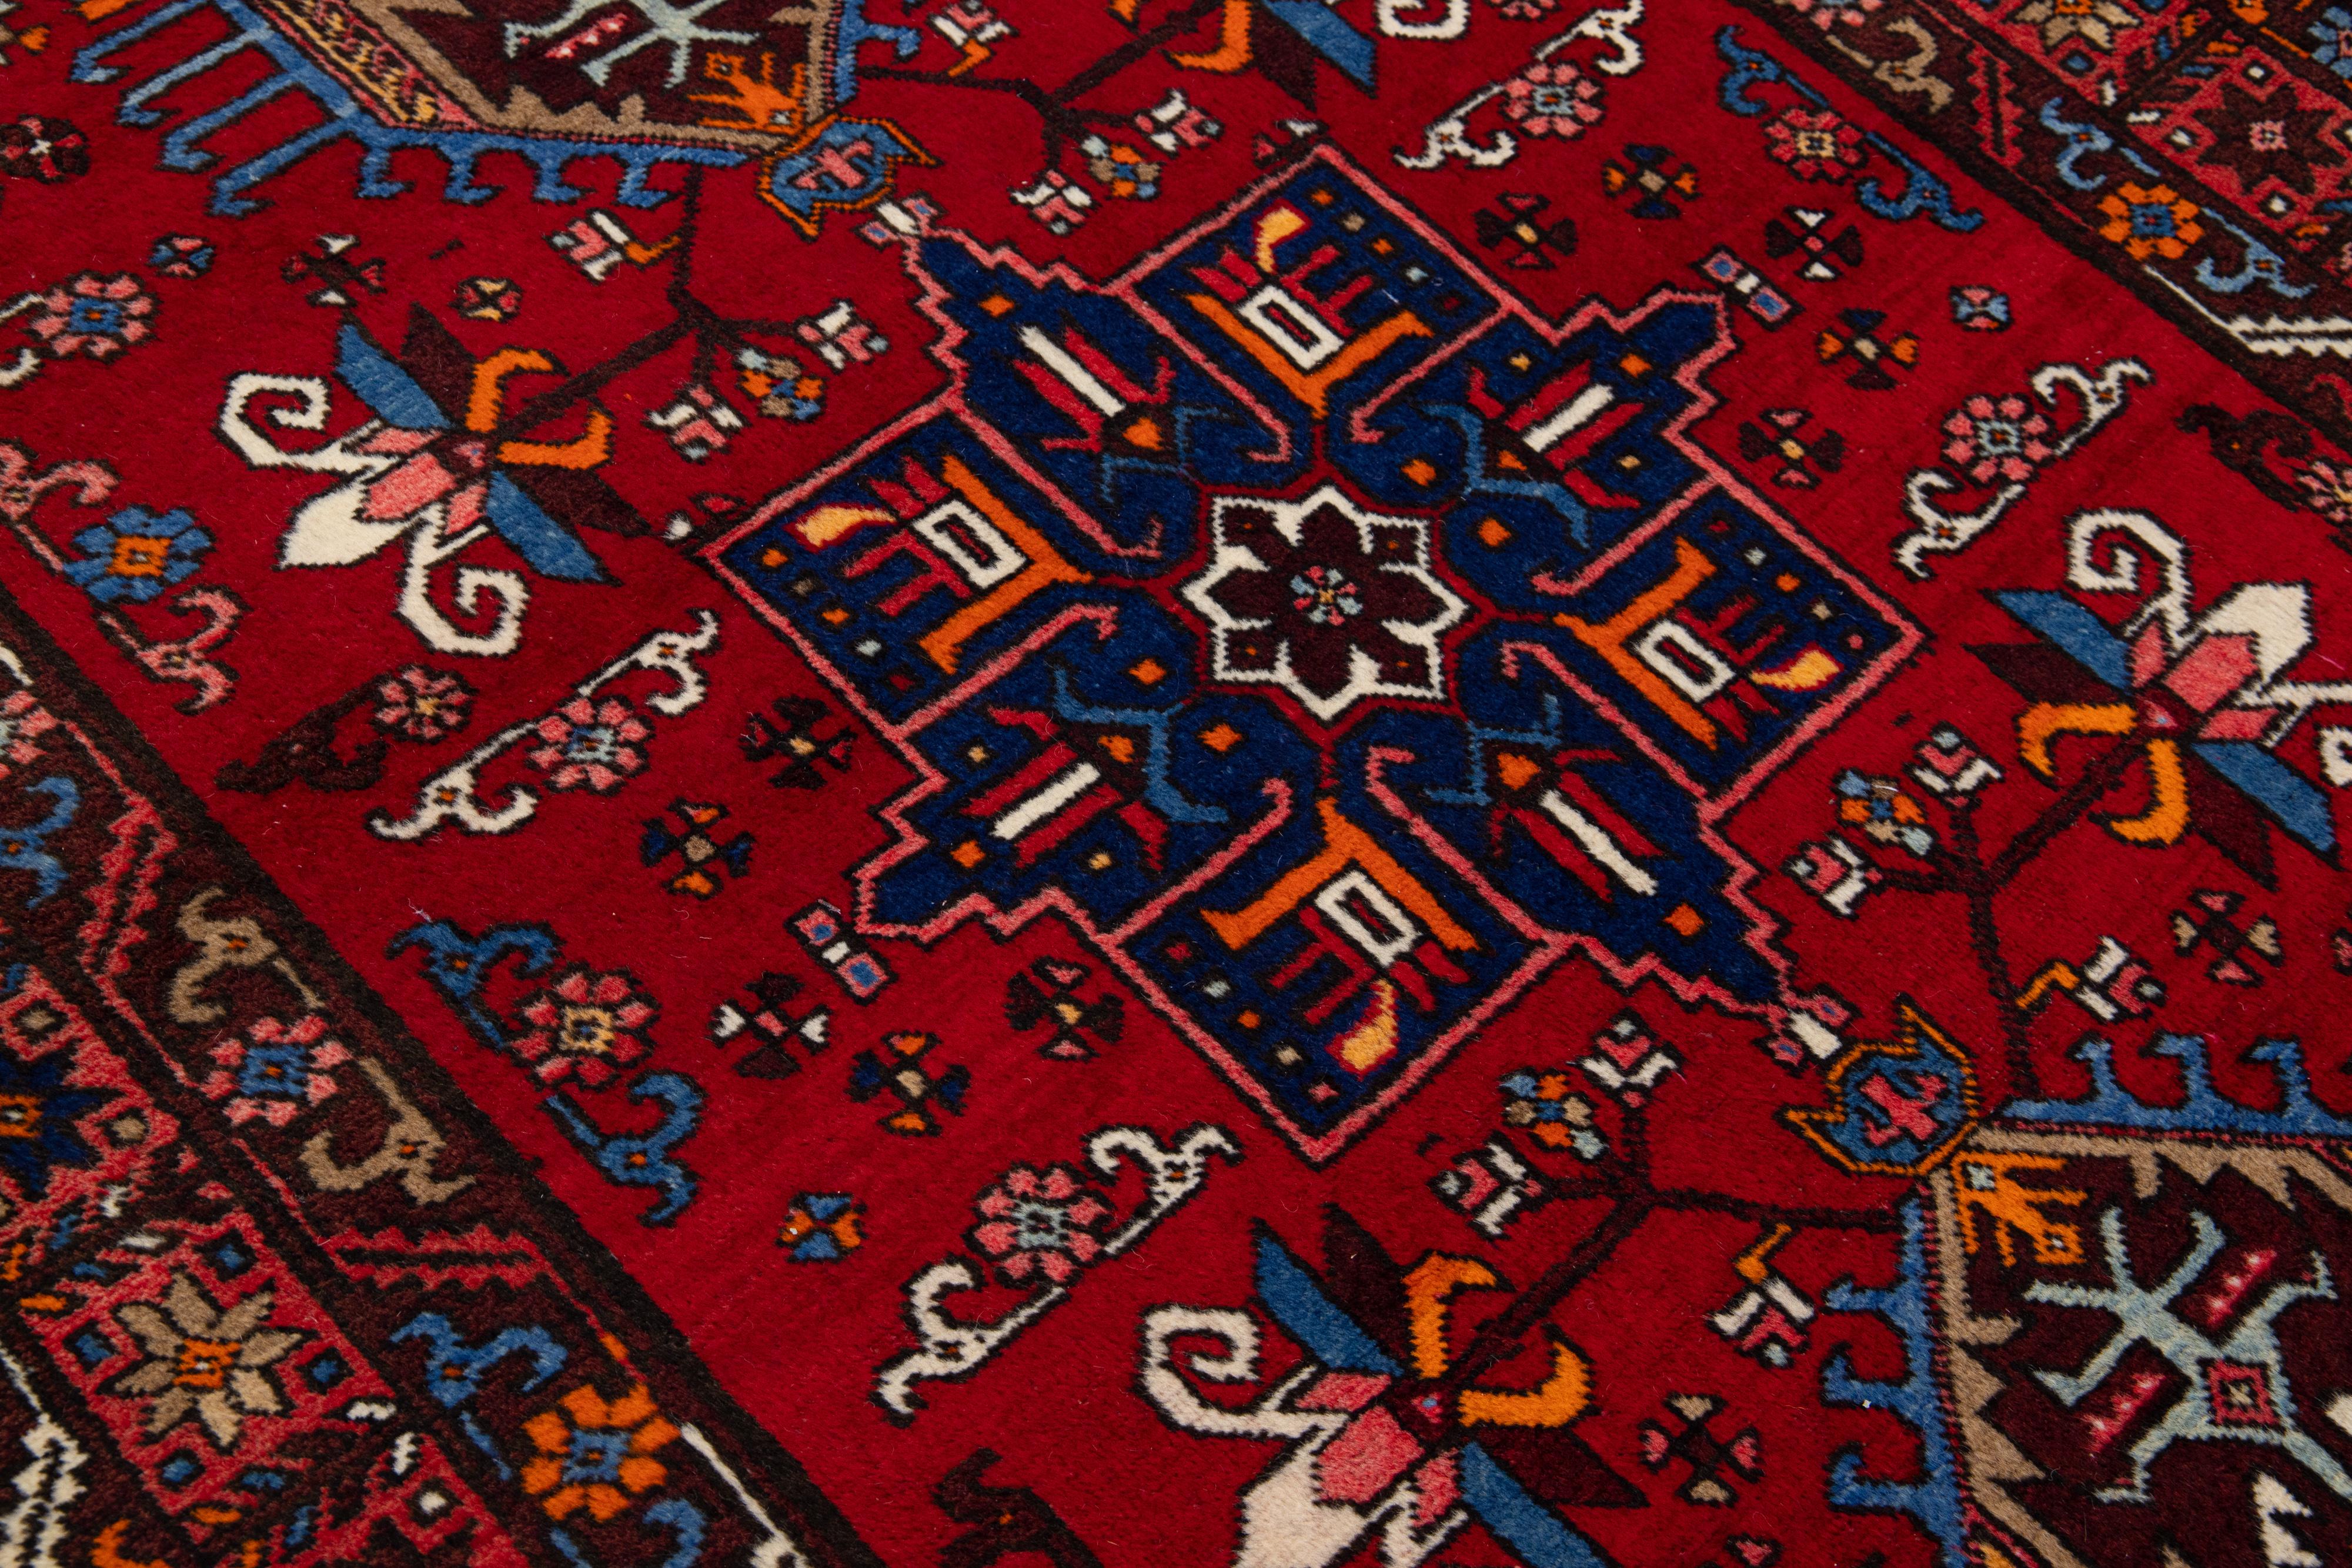 Beautiful antique Heriz hand-knotted wool rug with a red color field. This Persian rug has a designed frame and multicolor accents in a gorgeous Tribal design.

This rug measures: 4'10